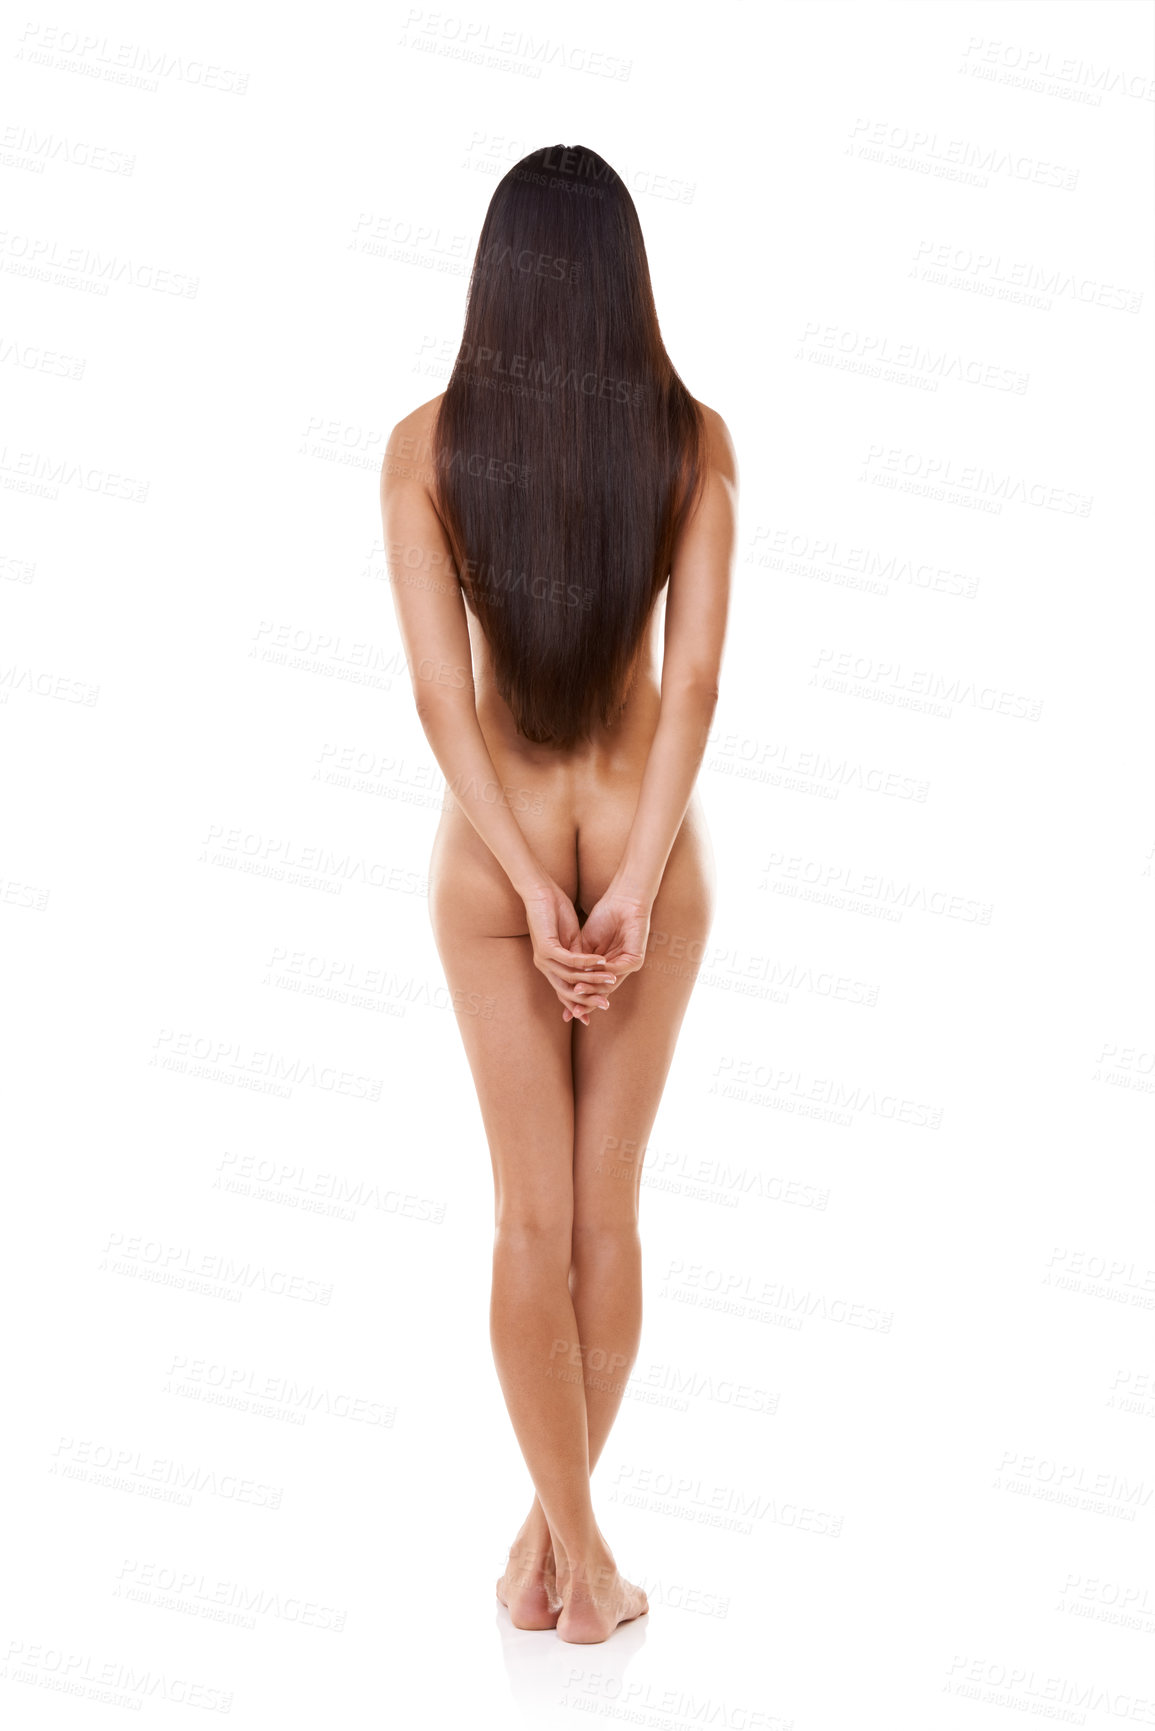 Buy stock photo Rearview shot of a naked woman with long brunette hair isolated on white